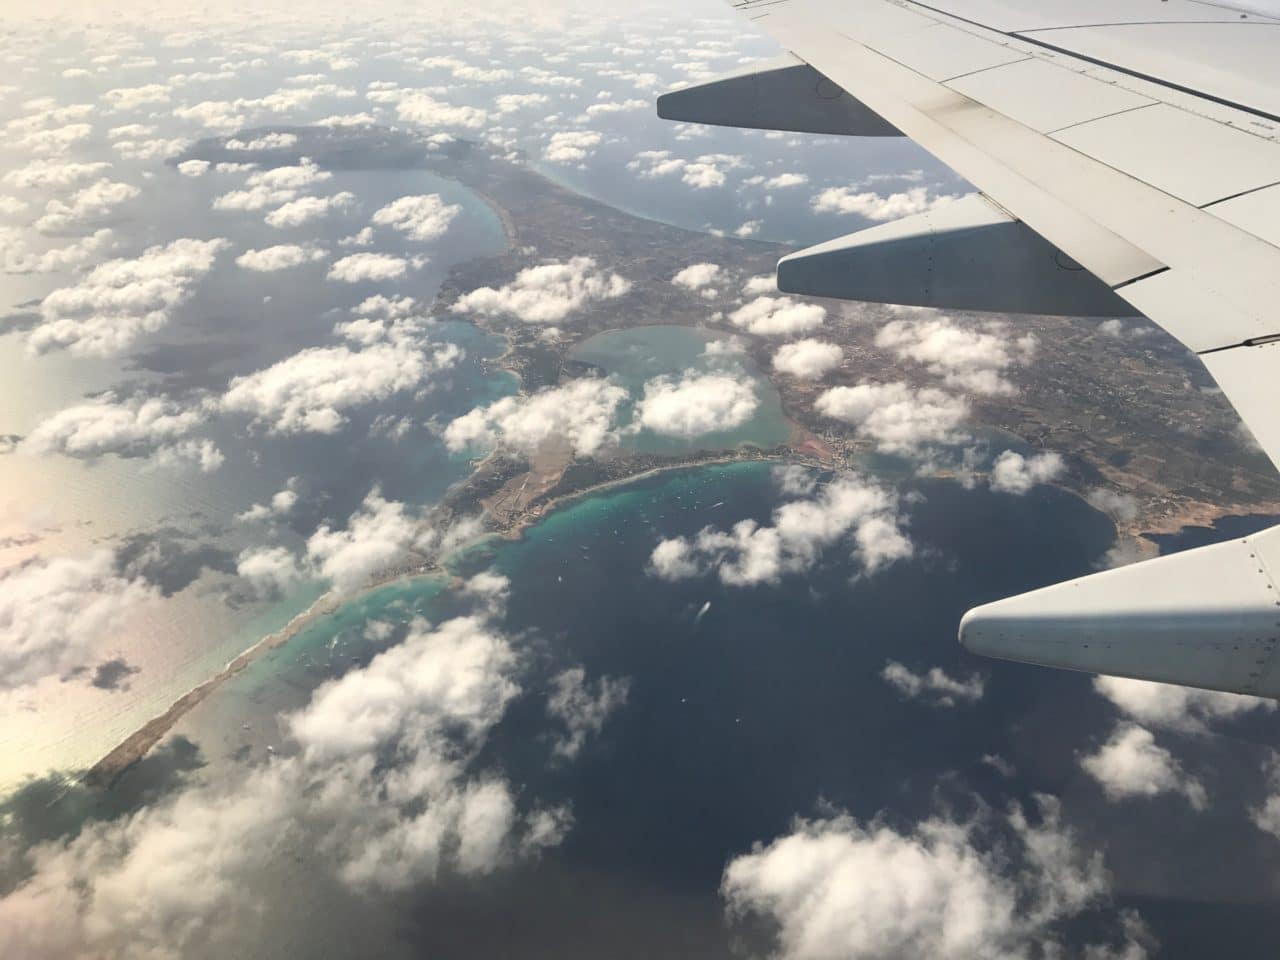 Coatsal View Of Island Cove And Wing When Flying